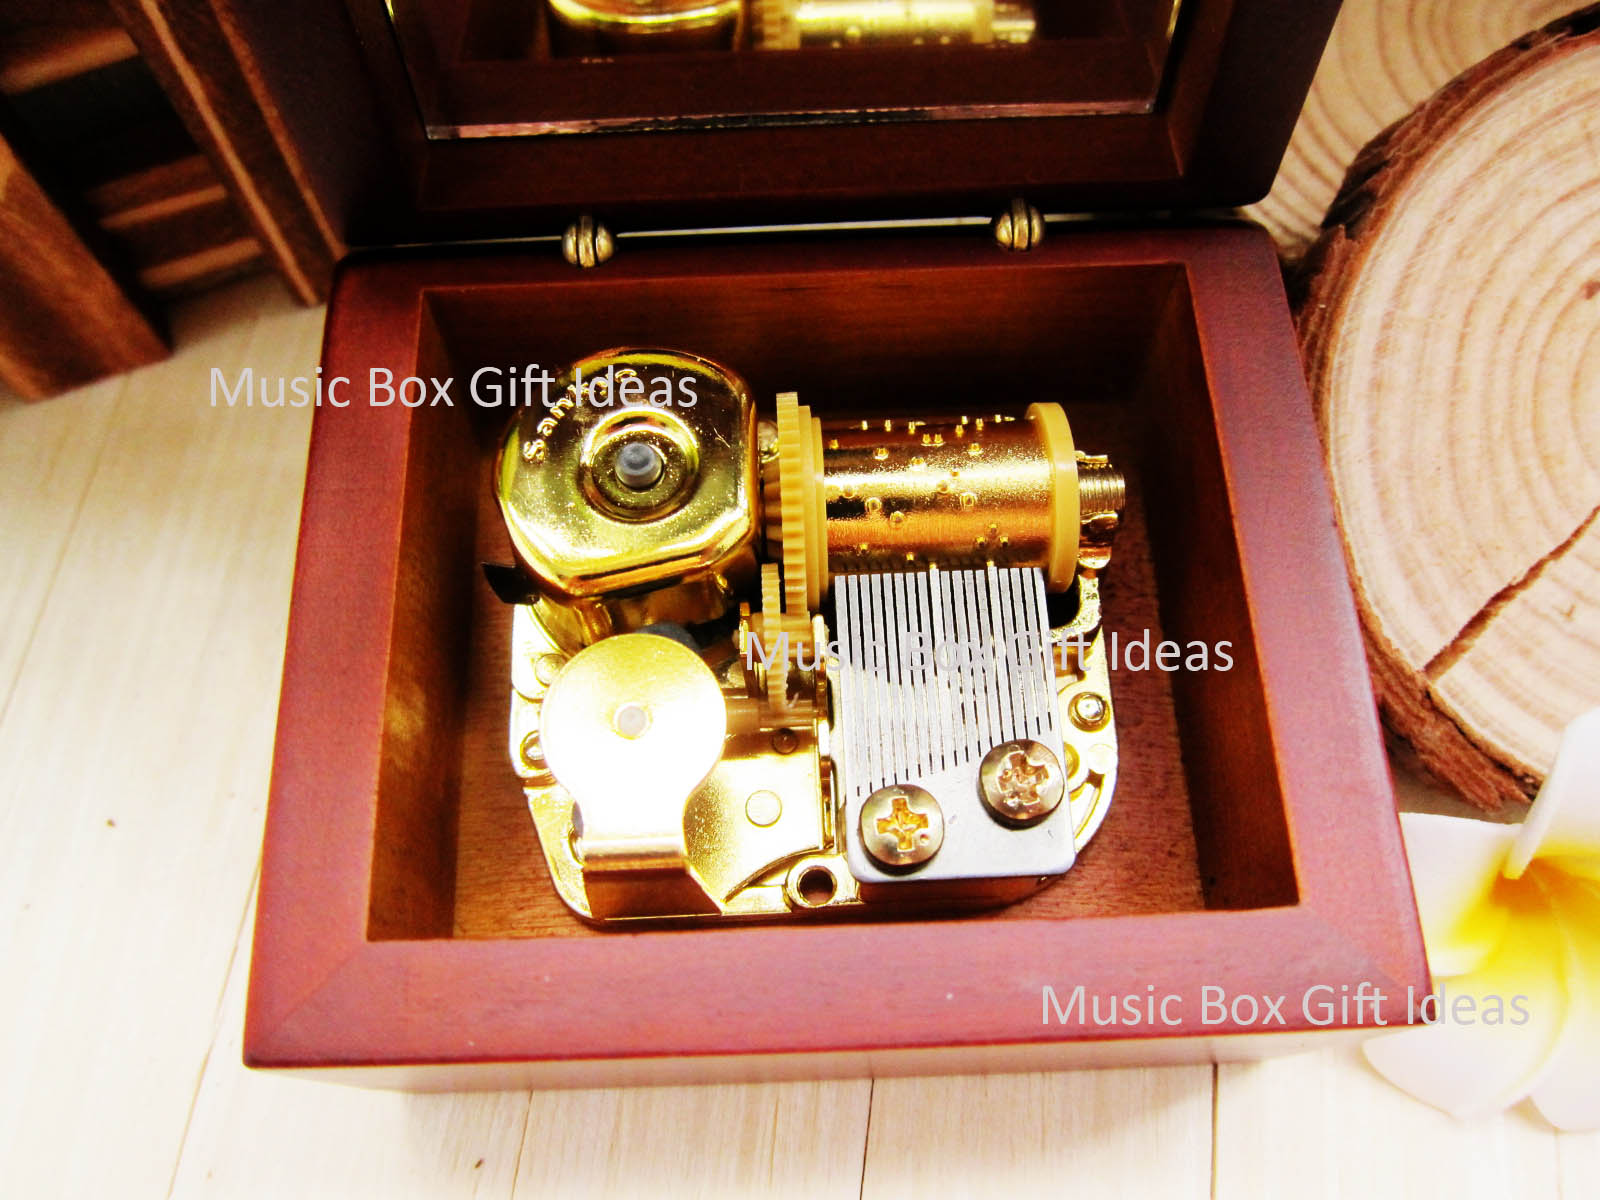 Les MisÃ©rables Soundtrack Own My Own Ã‰ponine 18-Note Music Box Gift (Wooden Clockwork) - Music Box Gift Ideas